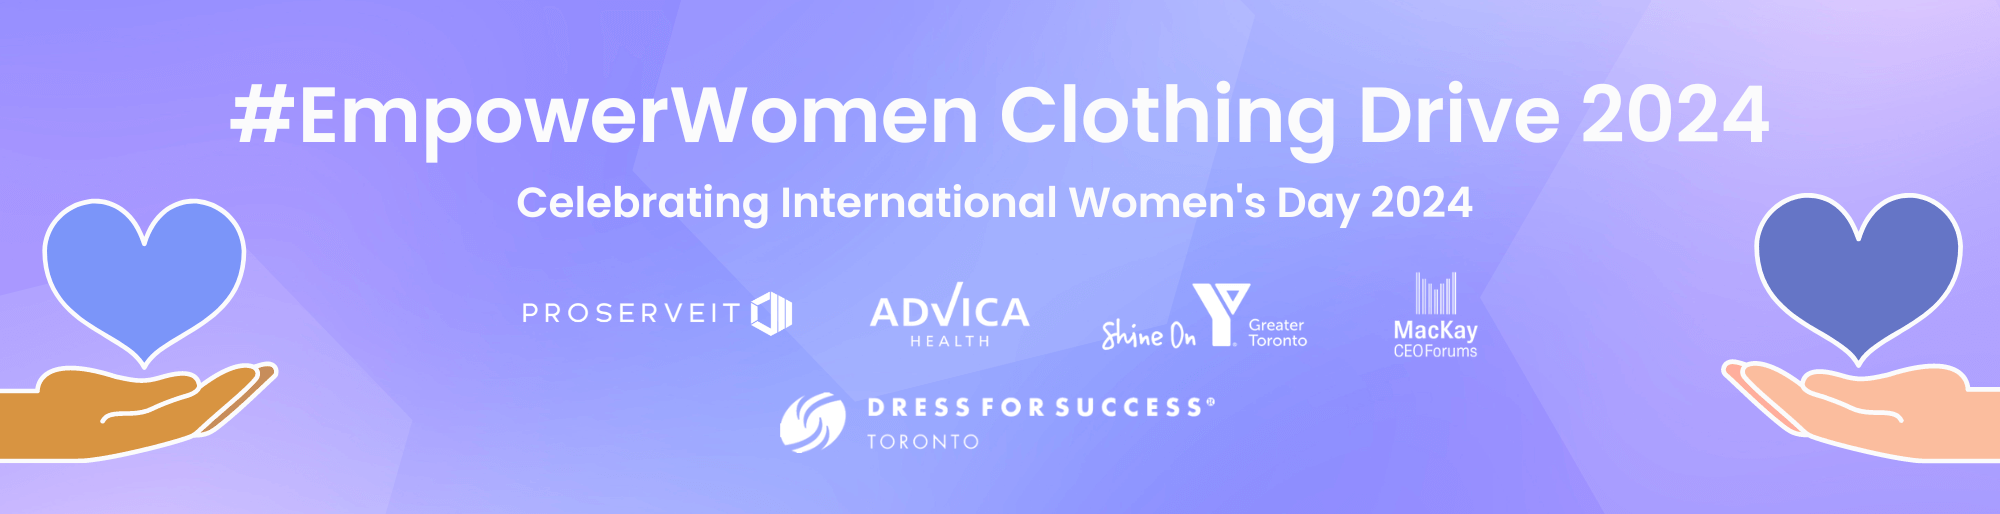 Empower Women Clothing Drive